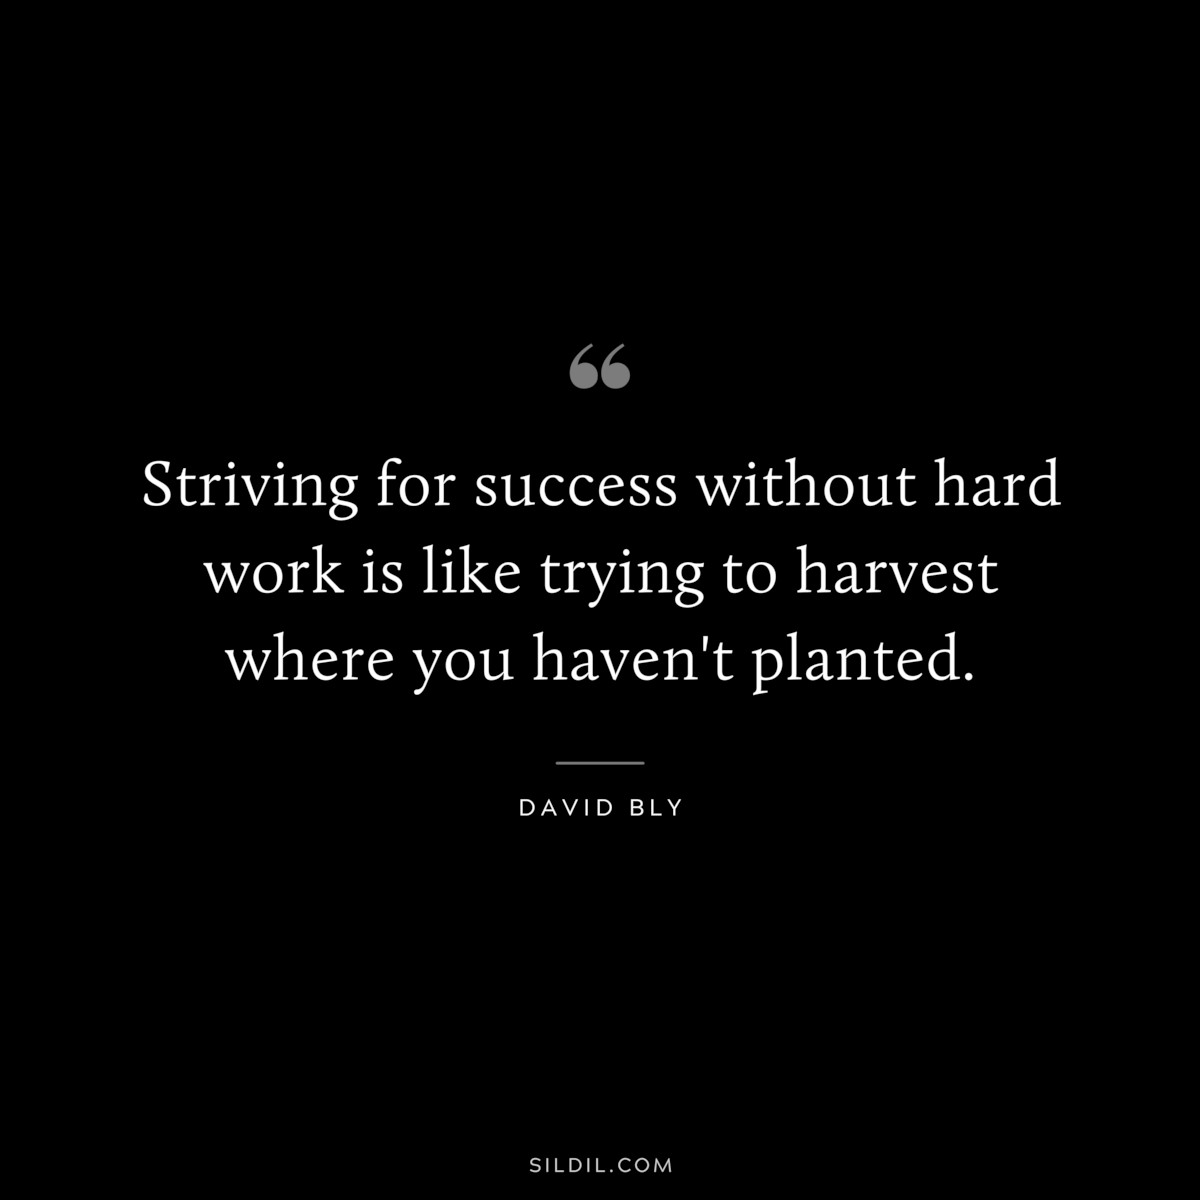 Striving for success without hard work is like trying to harvest where you haven't planted. ― David Bly 